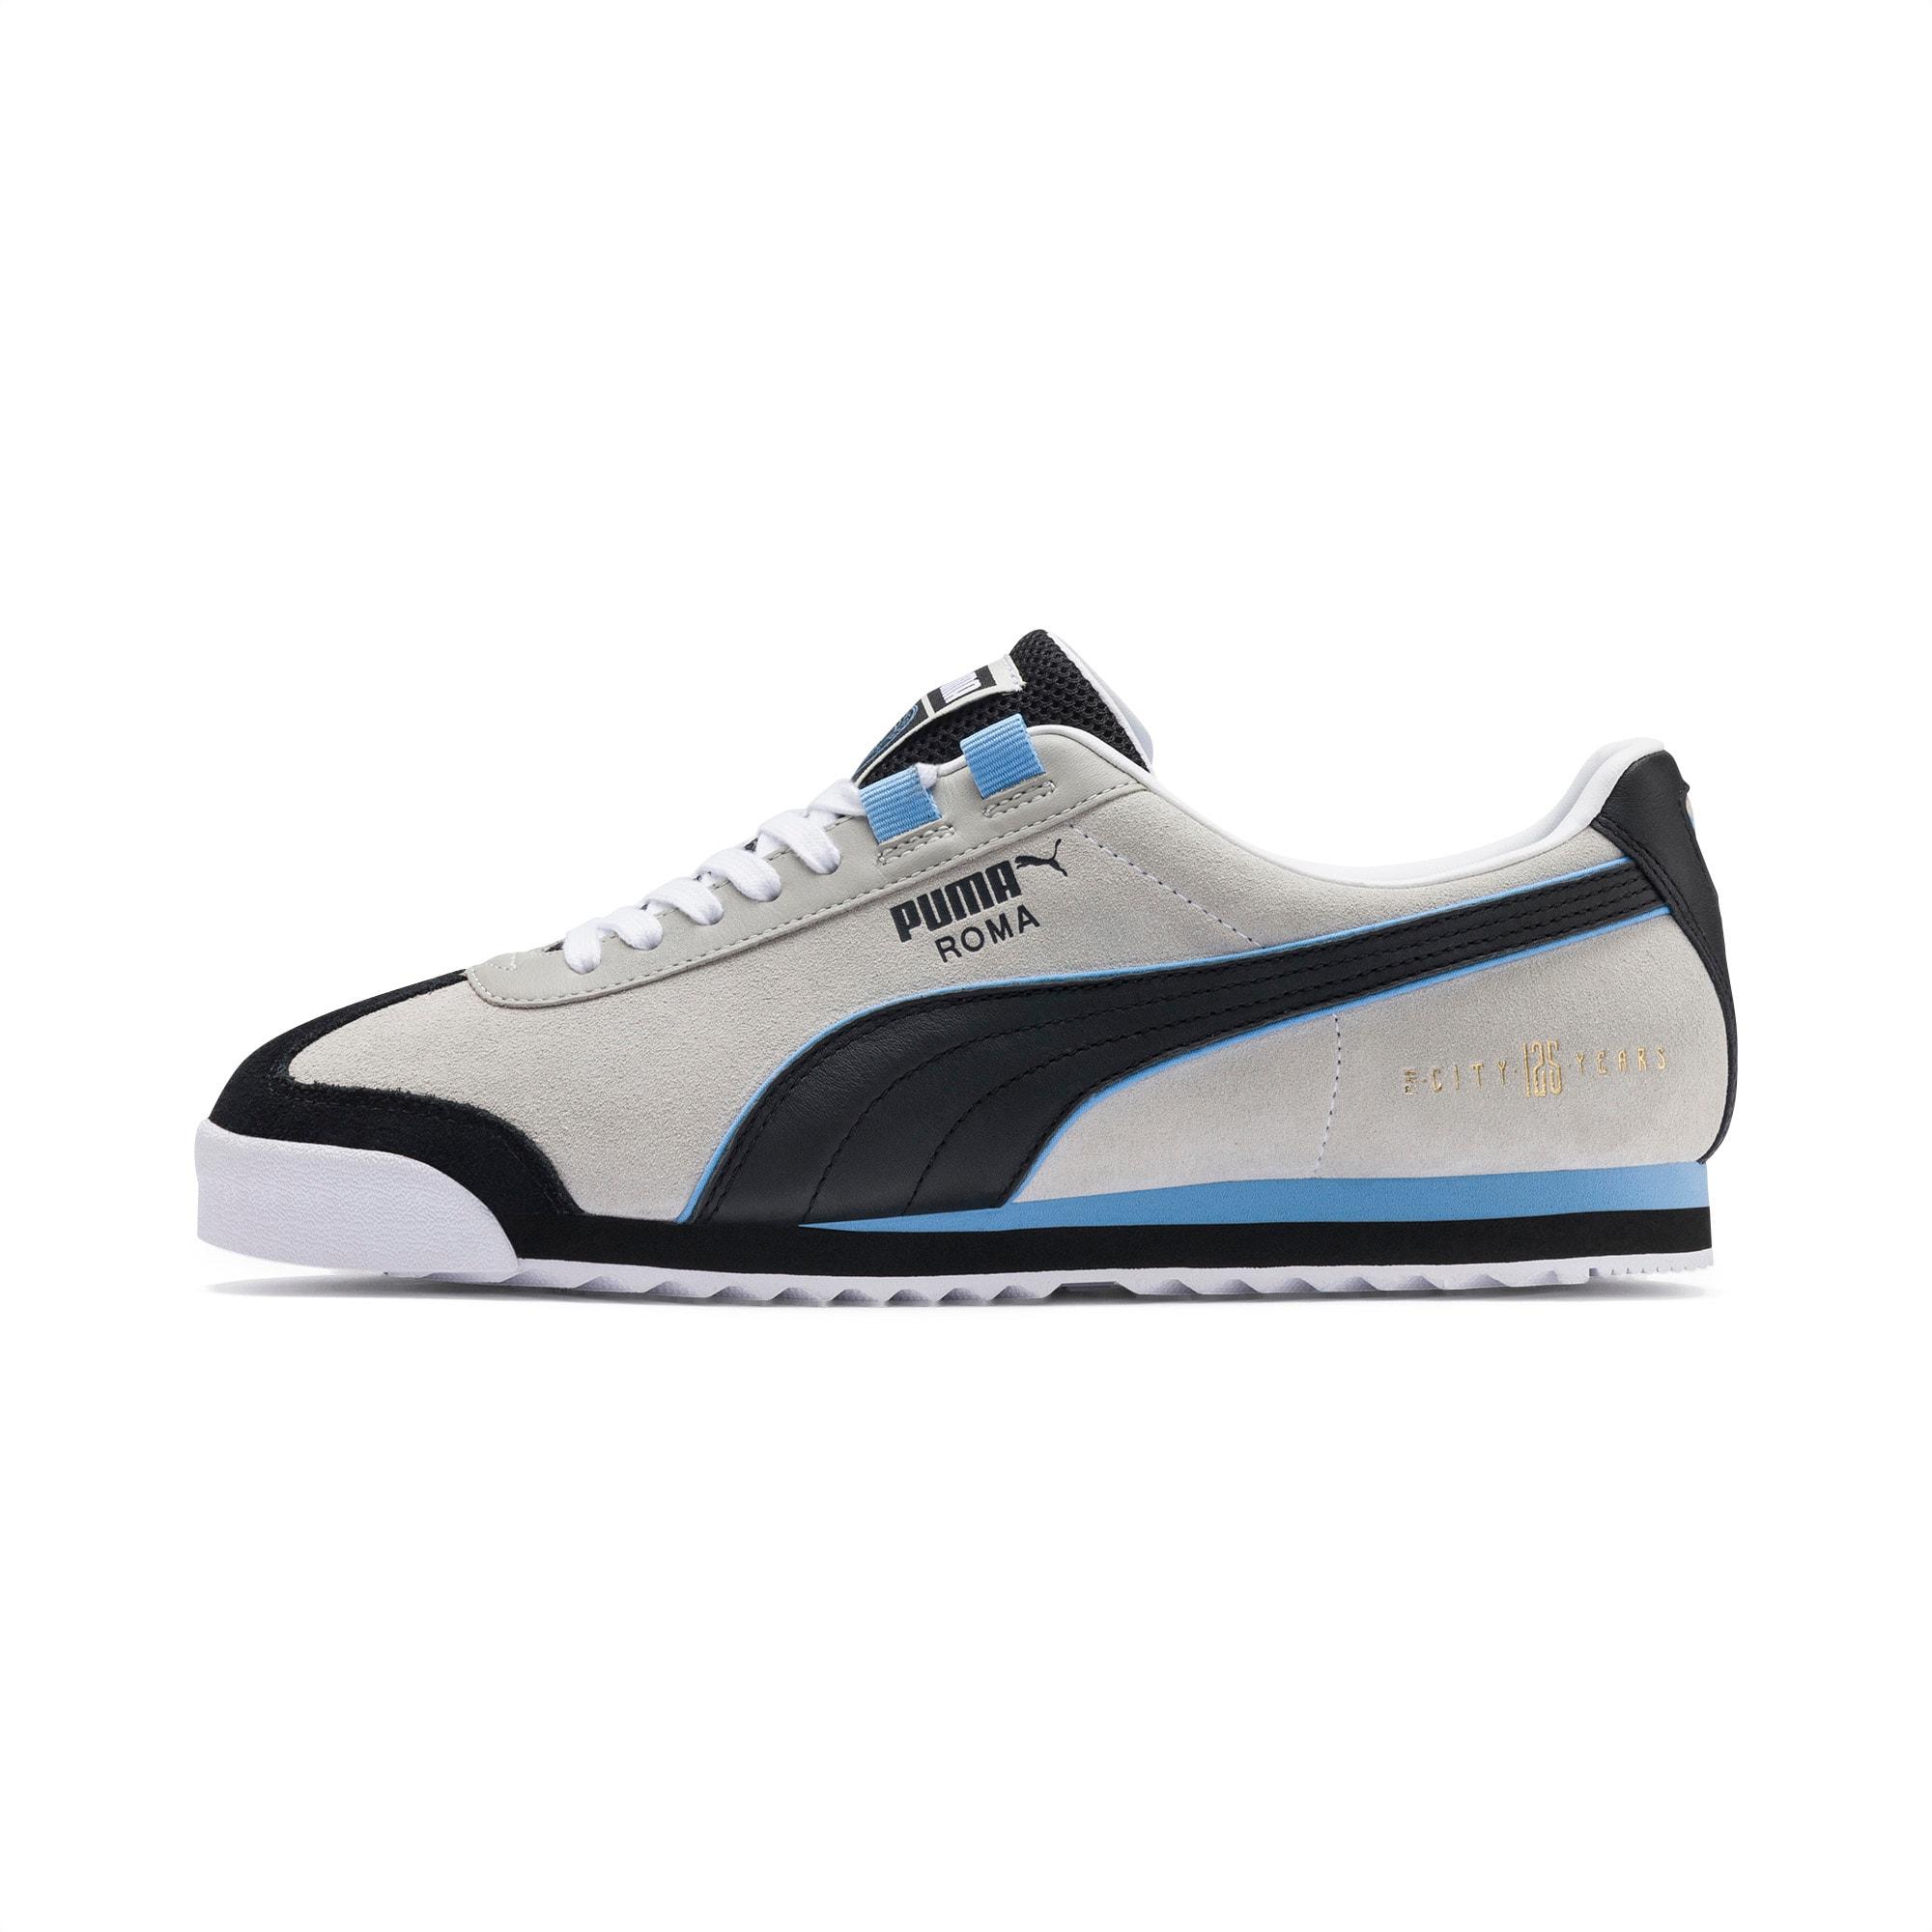 PUMA Rubber Roma Manchester City Sneakers in Blue for Men - Lyst